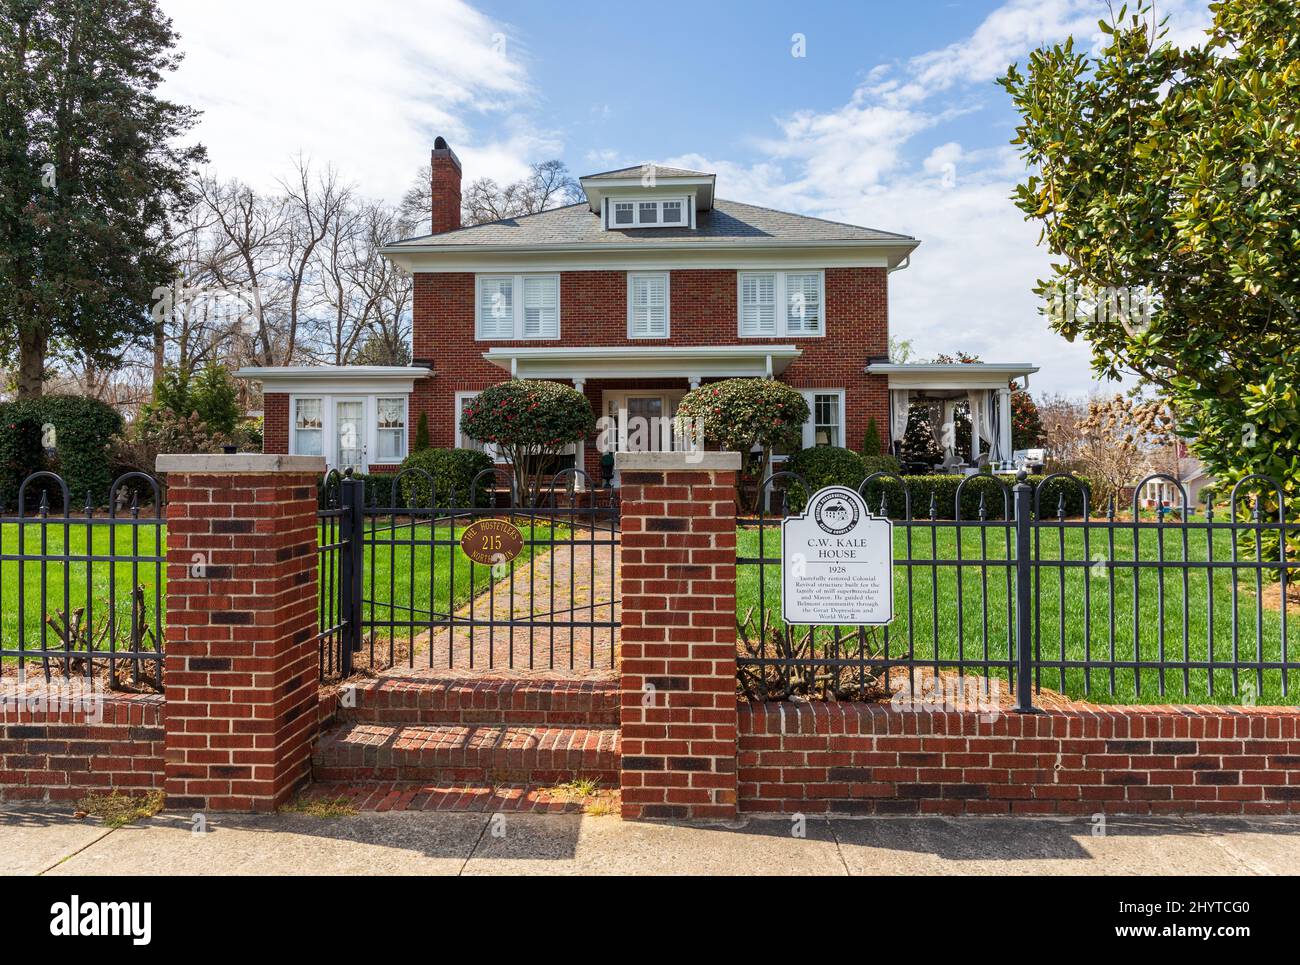 BELMONT, NC, USA-8 MARCH 2022: The C. W. Cale House, built in 1928, at 215 North Main St. Stock Photo